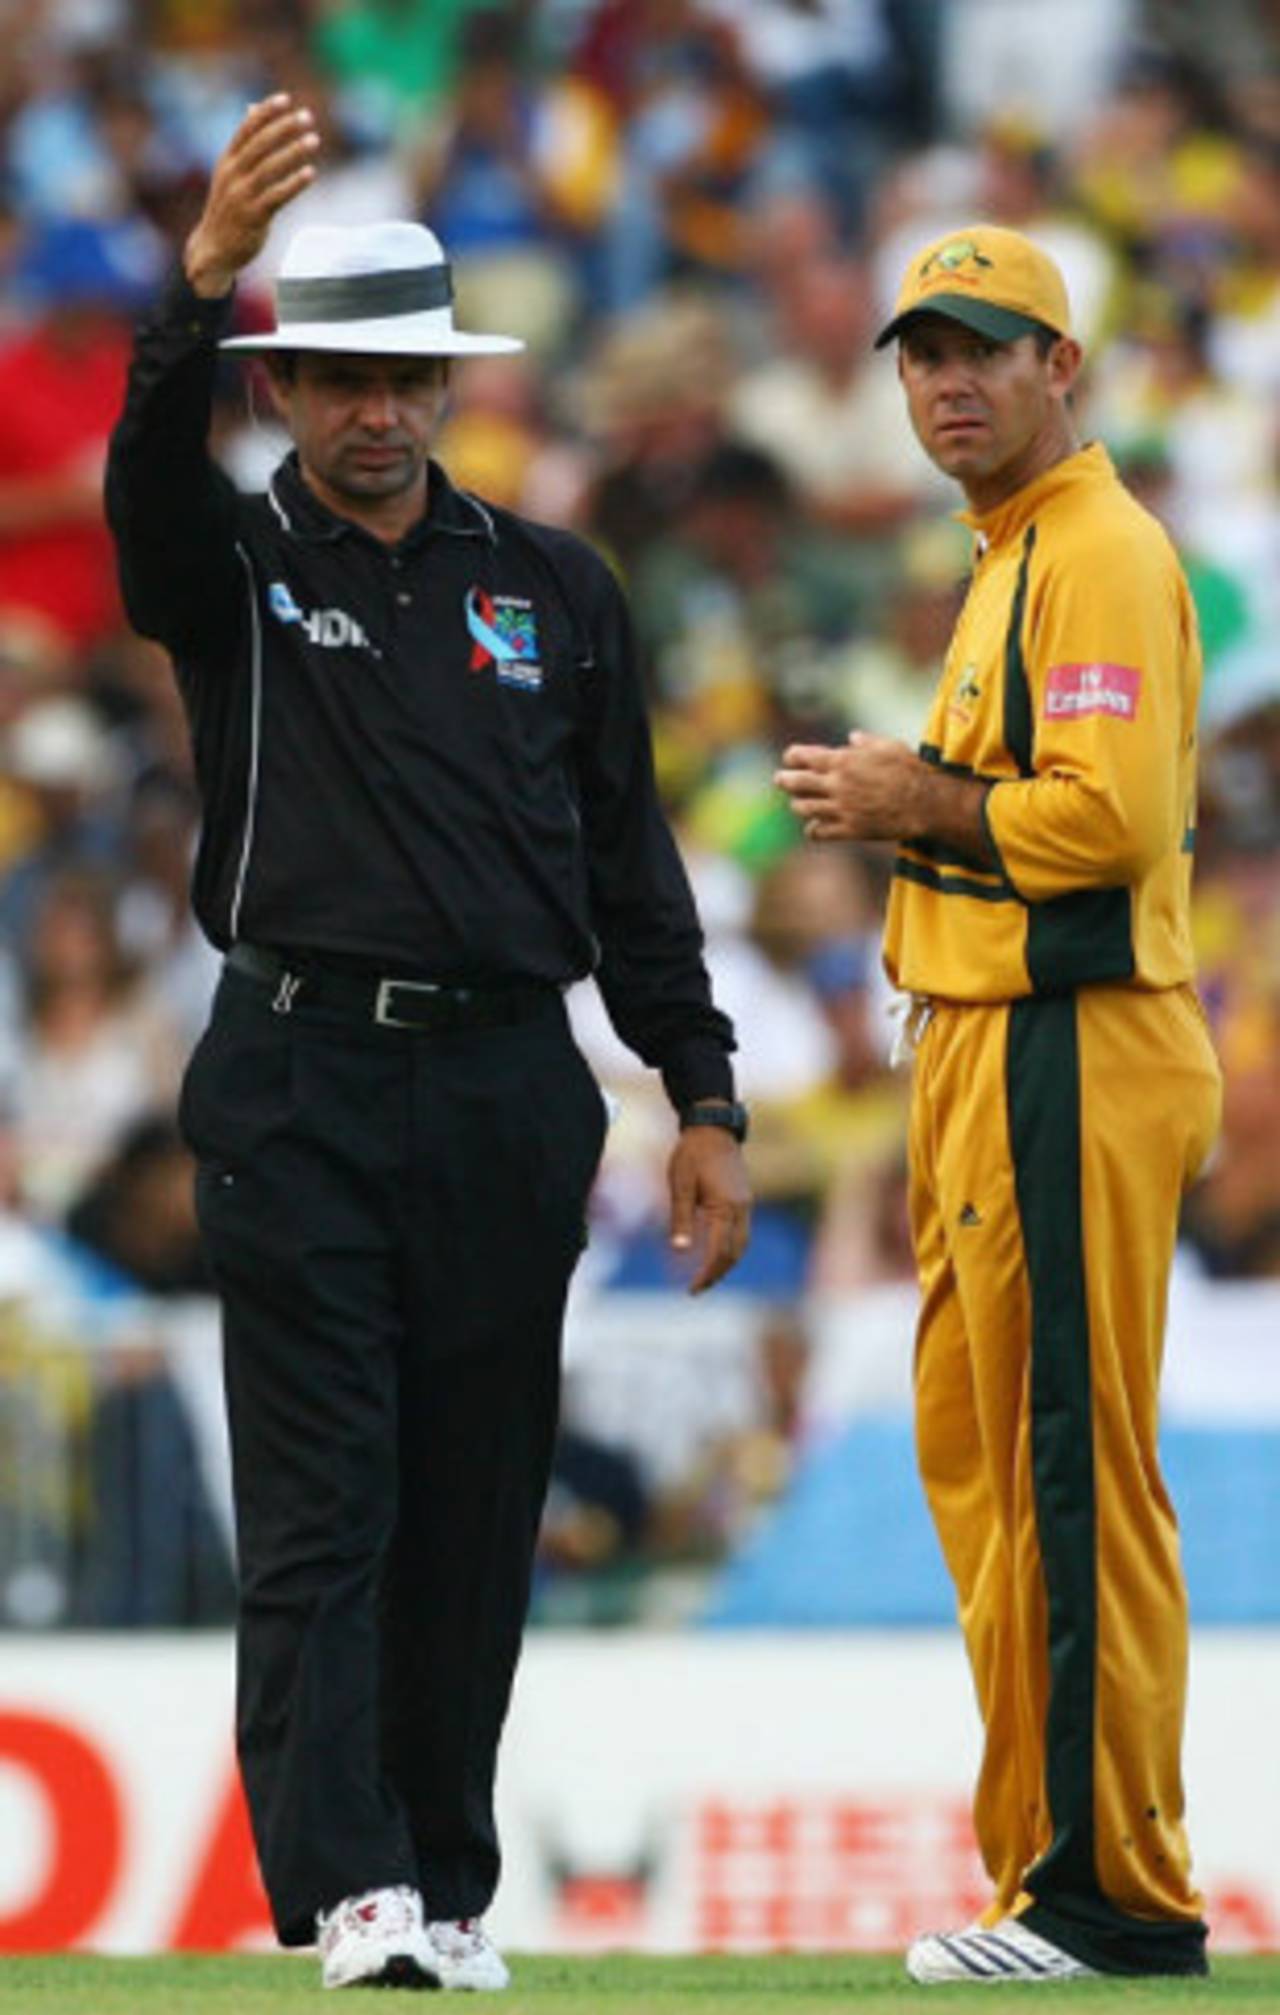 Aleem Dar: "As an umpire, it's imperative that you concentrate hard all the time and stay cool as well."&nbsp;&nbsp;&bull;&nbsp;&nbsp;Getty Images